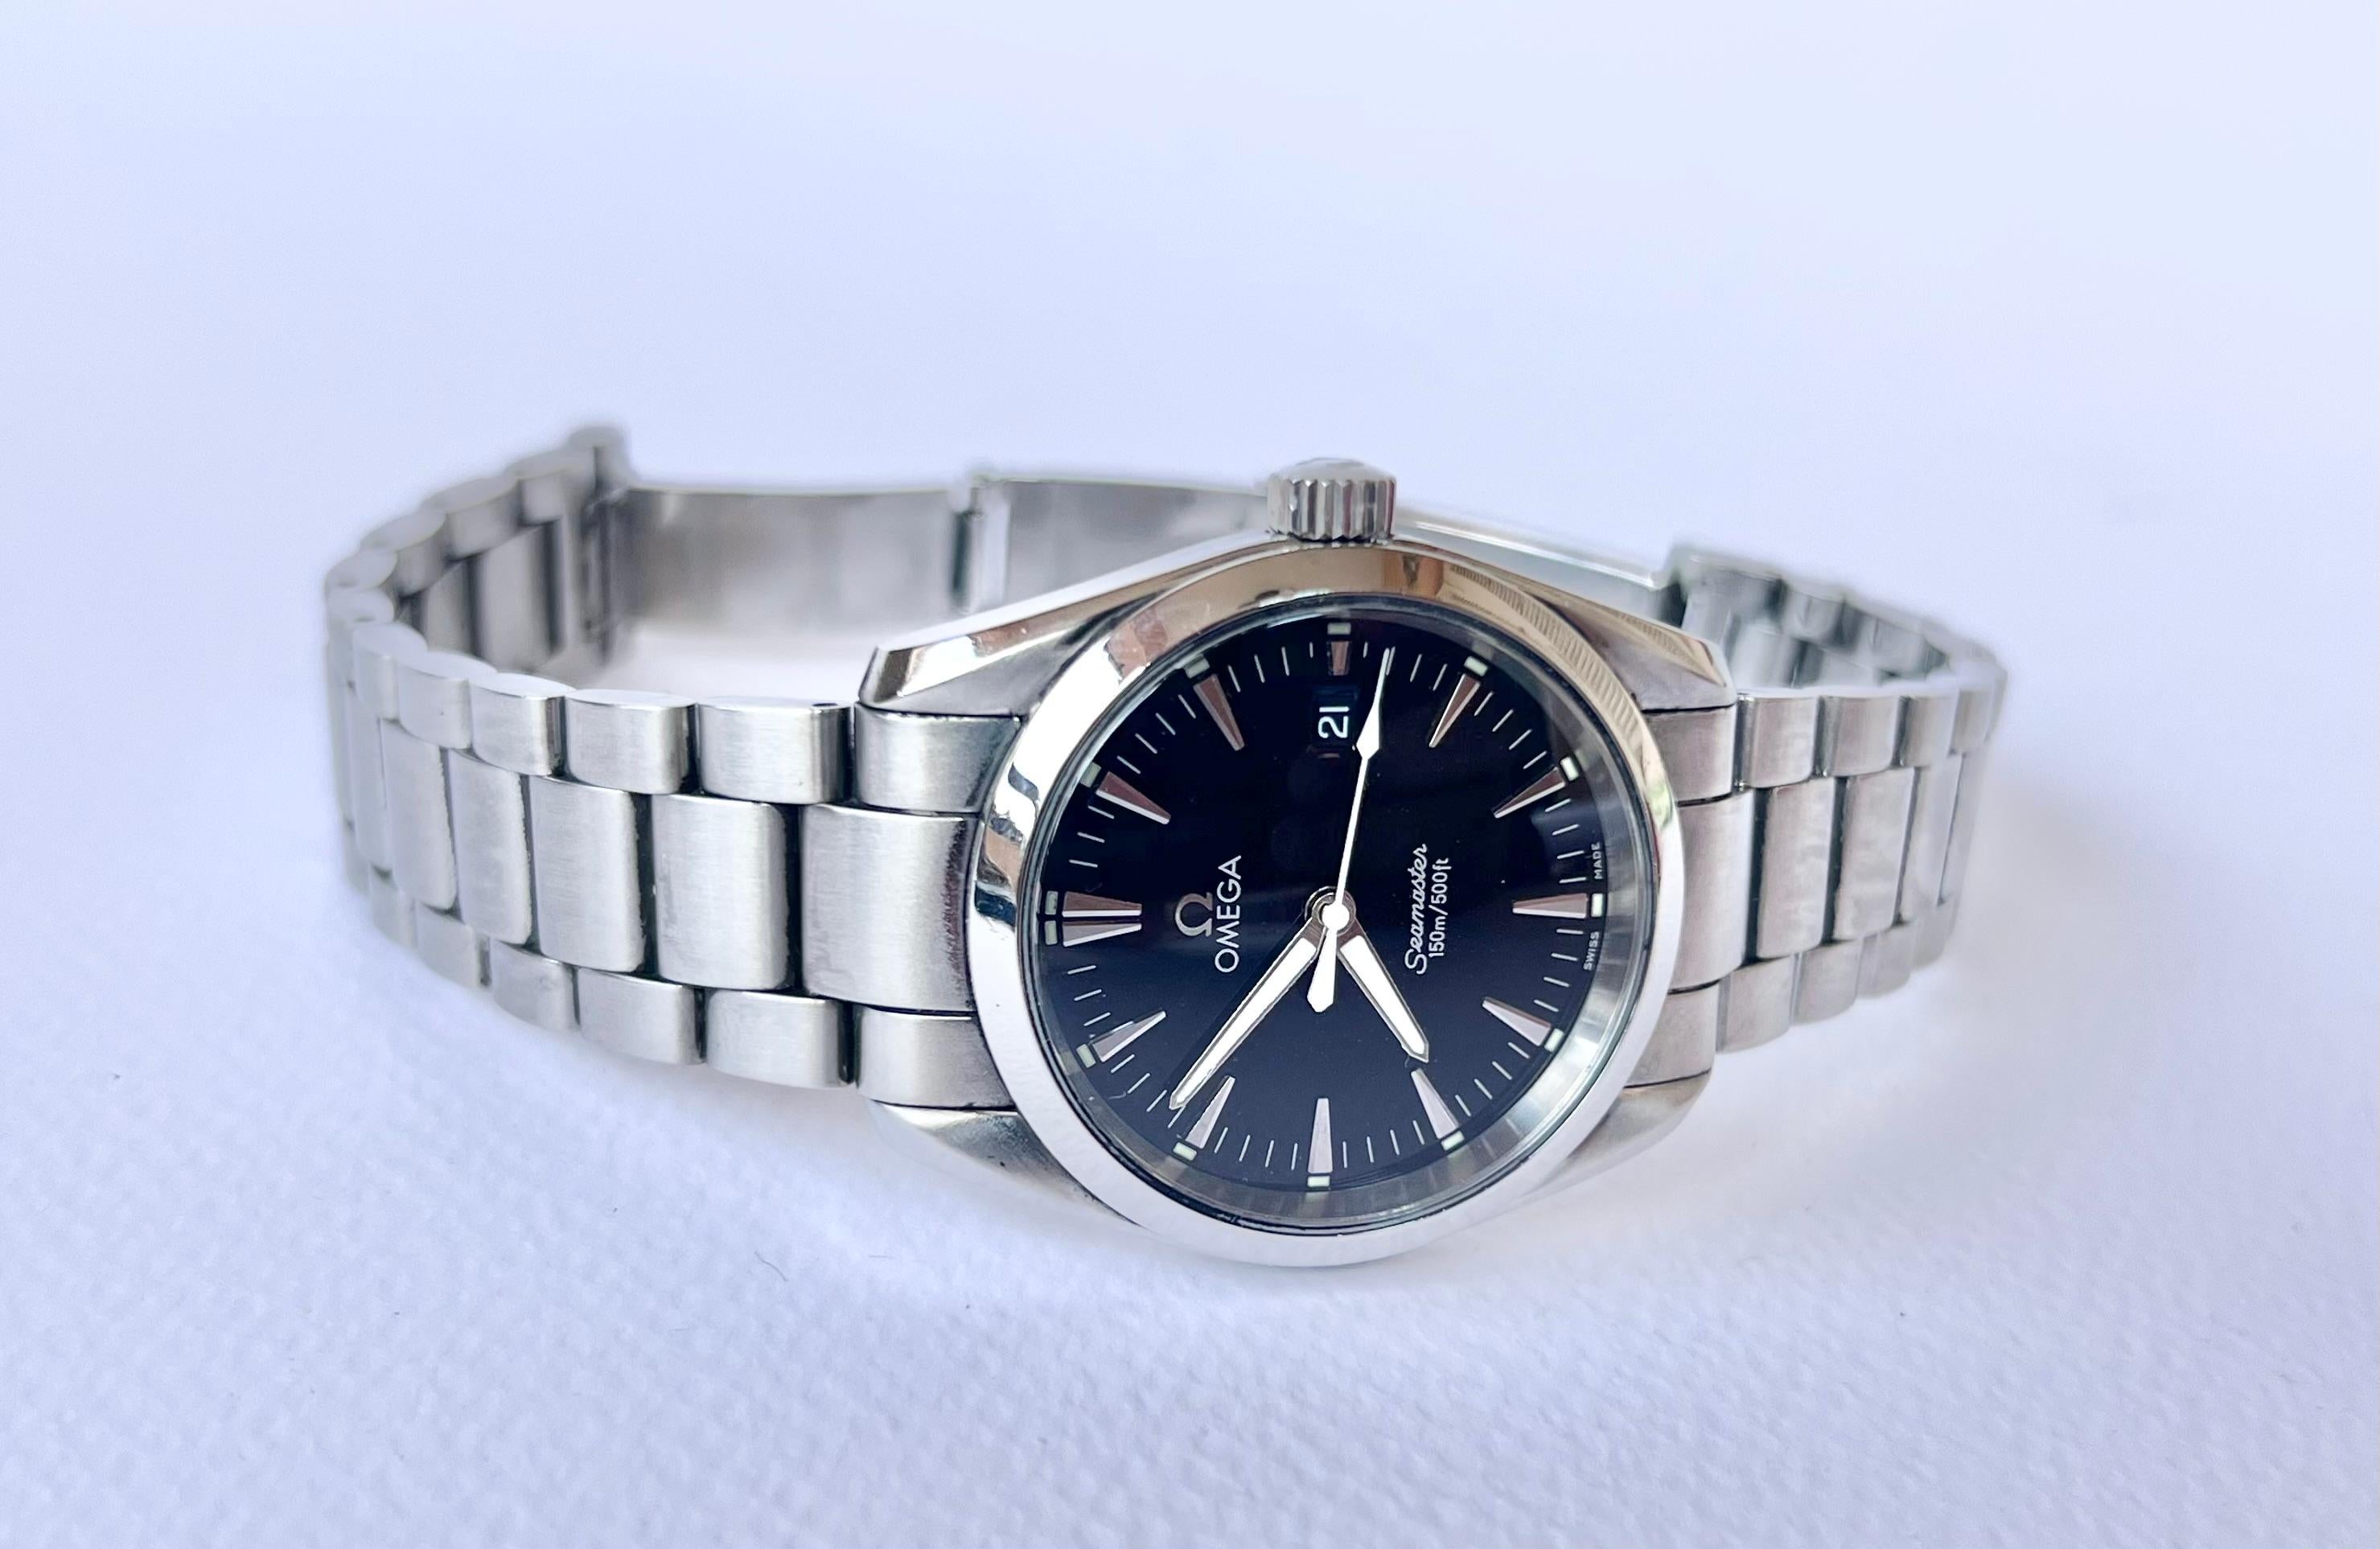 Brand : Omega

Model: Seamaster Aqua Terra

Reference: 1961113

Country Of Manufacture: Switzerland

Movement: Quartz 1538 Omega

Case Material: Stainless Steel

Measurements :37mm diameter (excluding crown )

Band Type : Omega SS with Marked